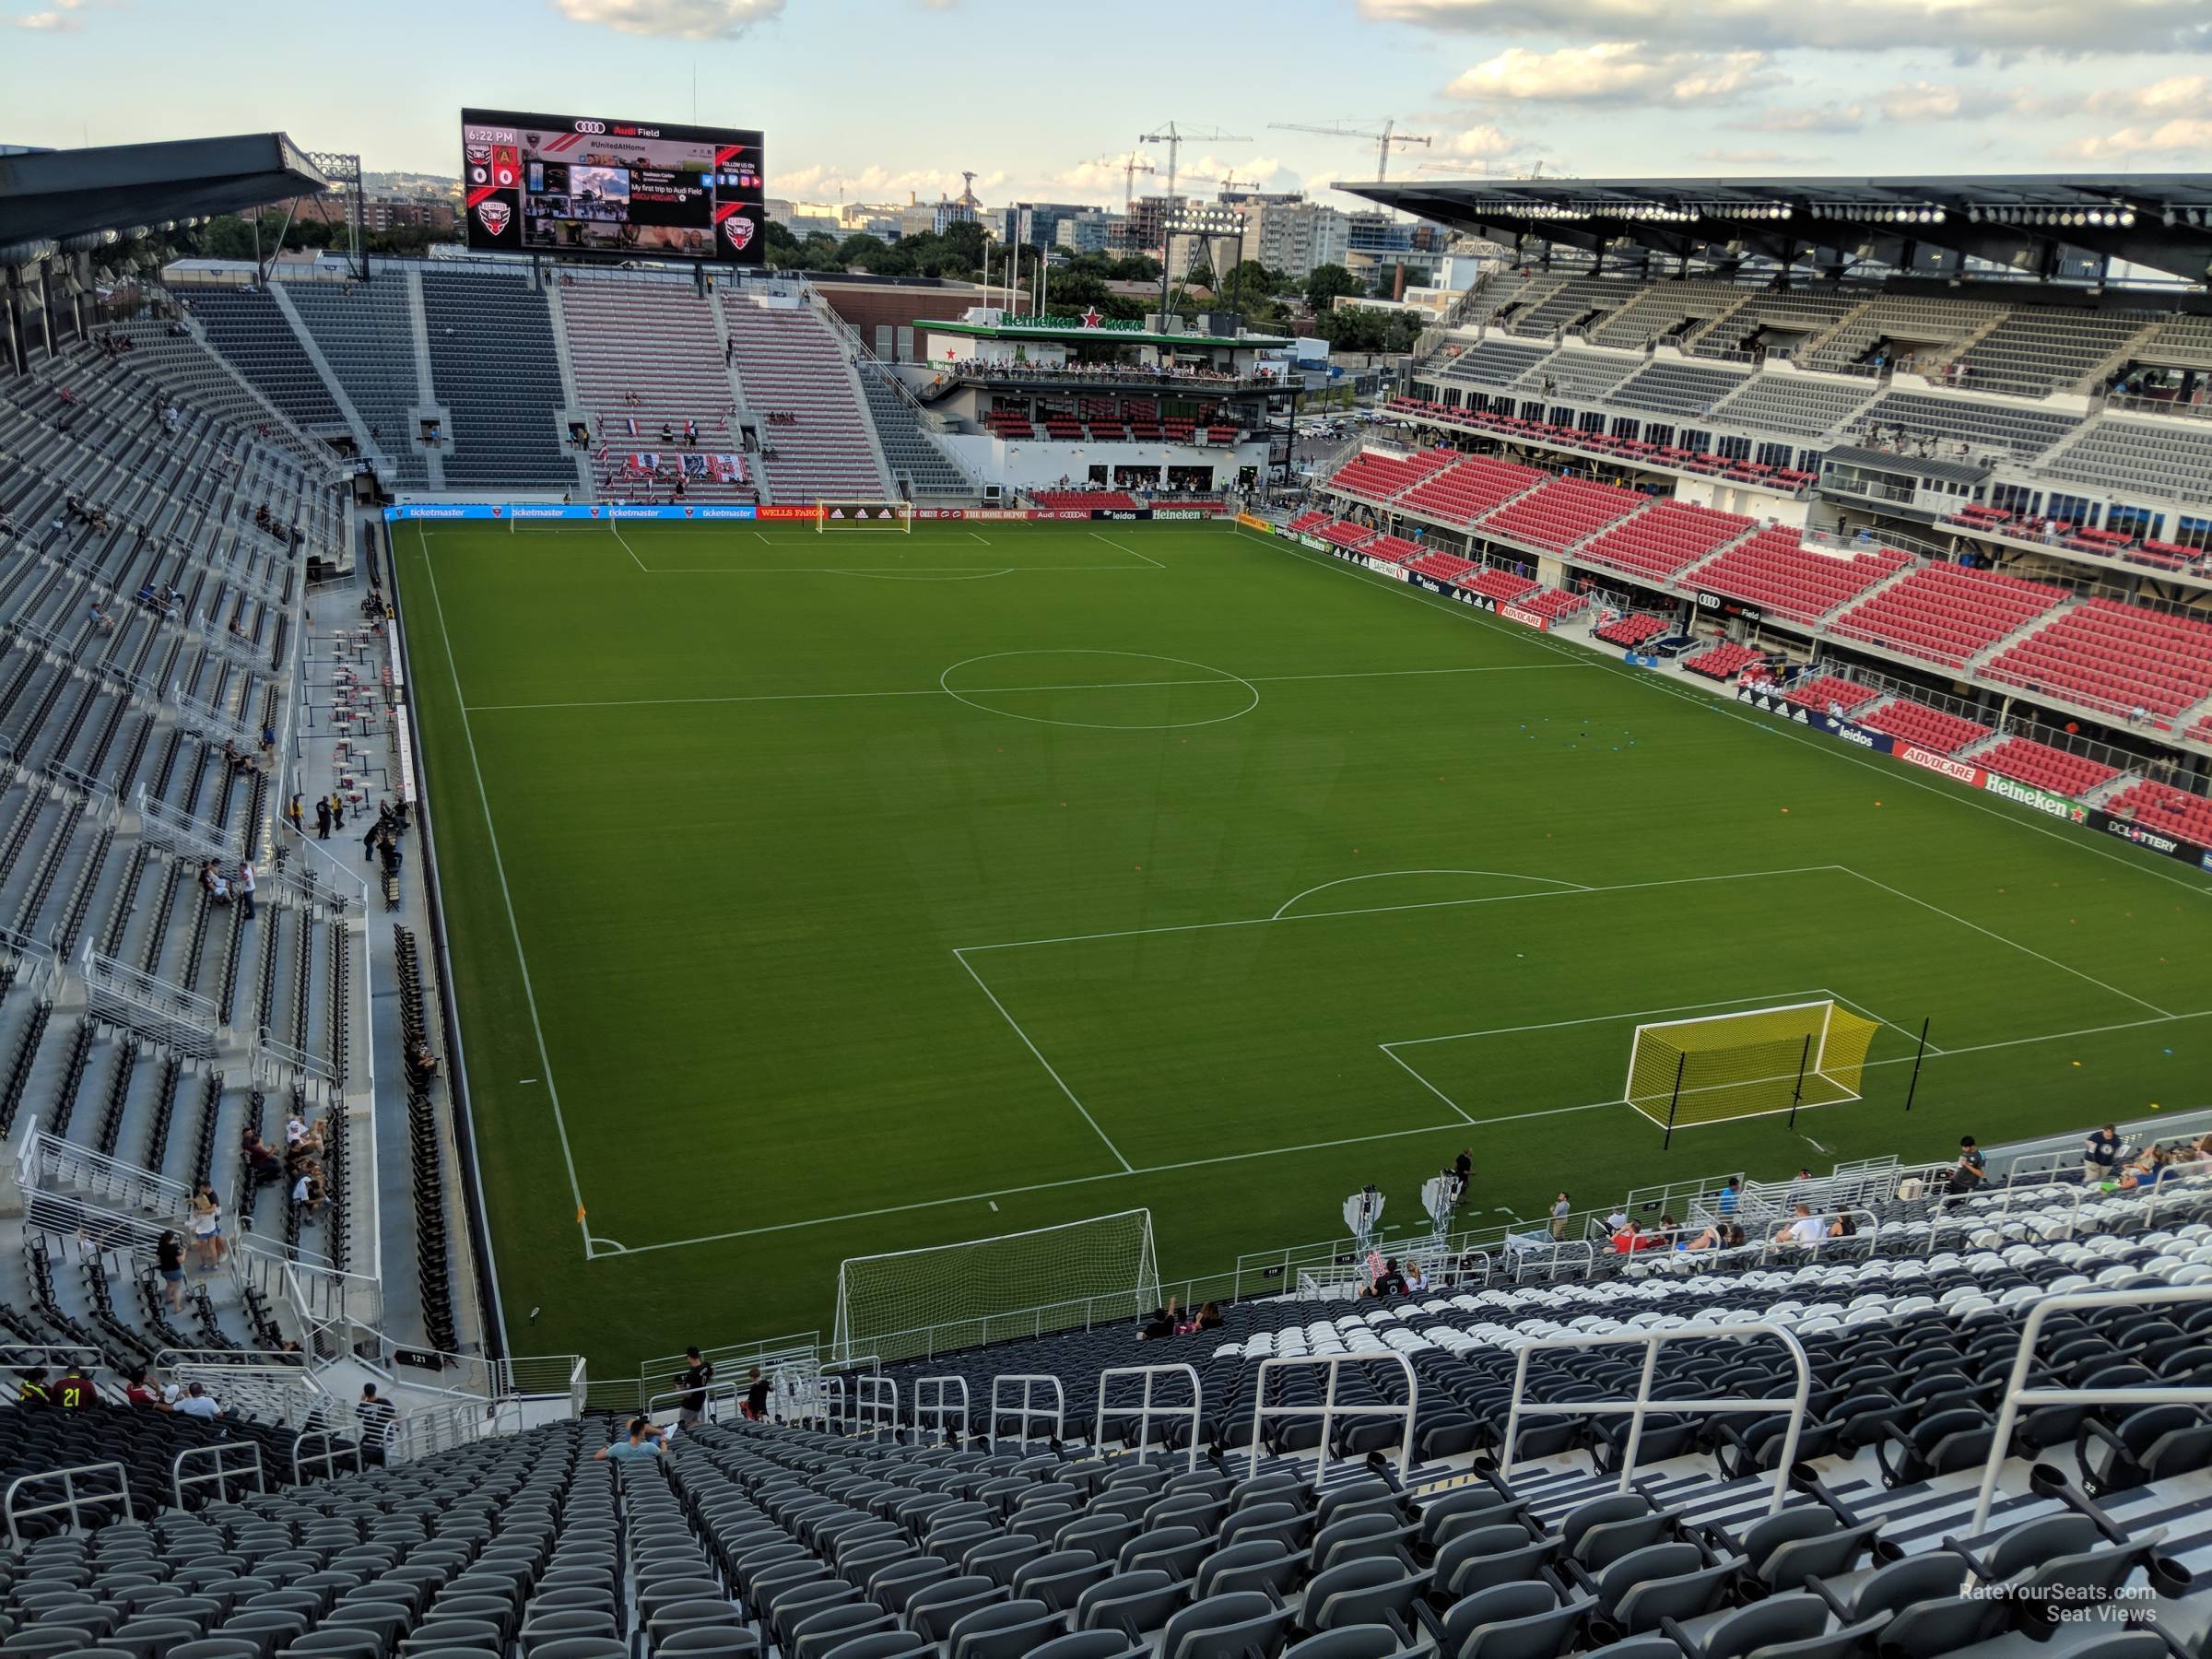 section 120, row 37 seat view  - audi field